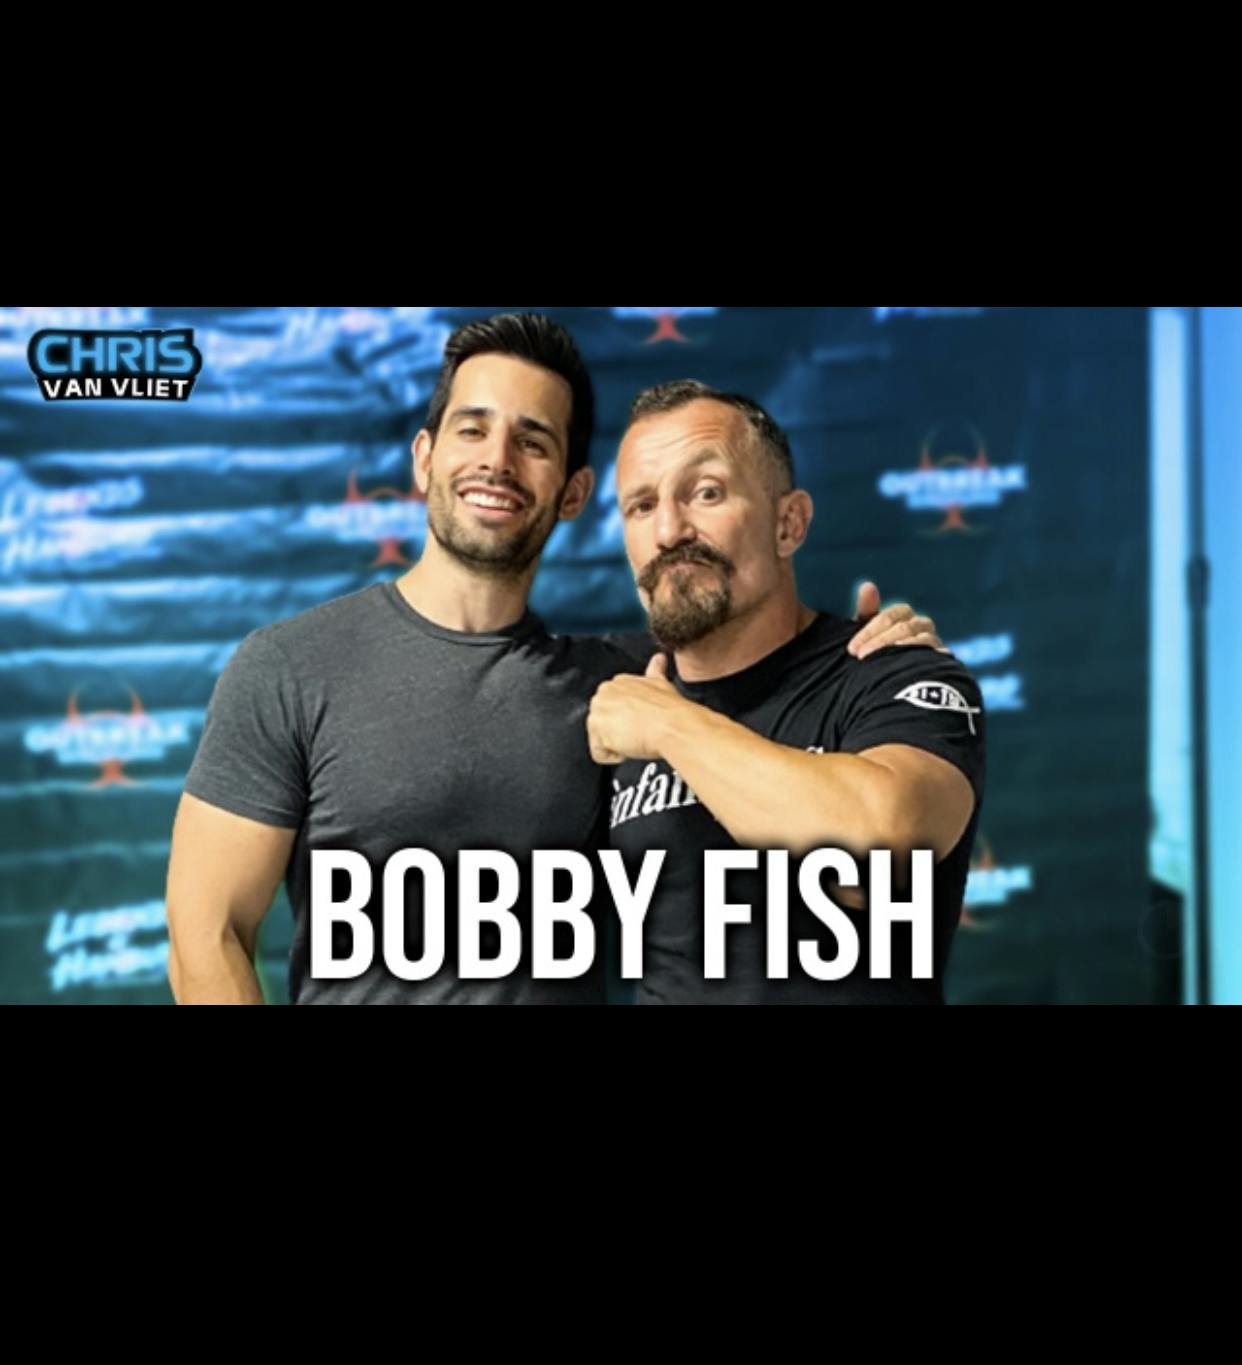 Bobby Fish on AEW, MLW, Undisputed Era, NXT, Adam Cole in AEW